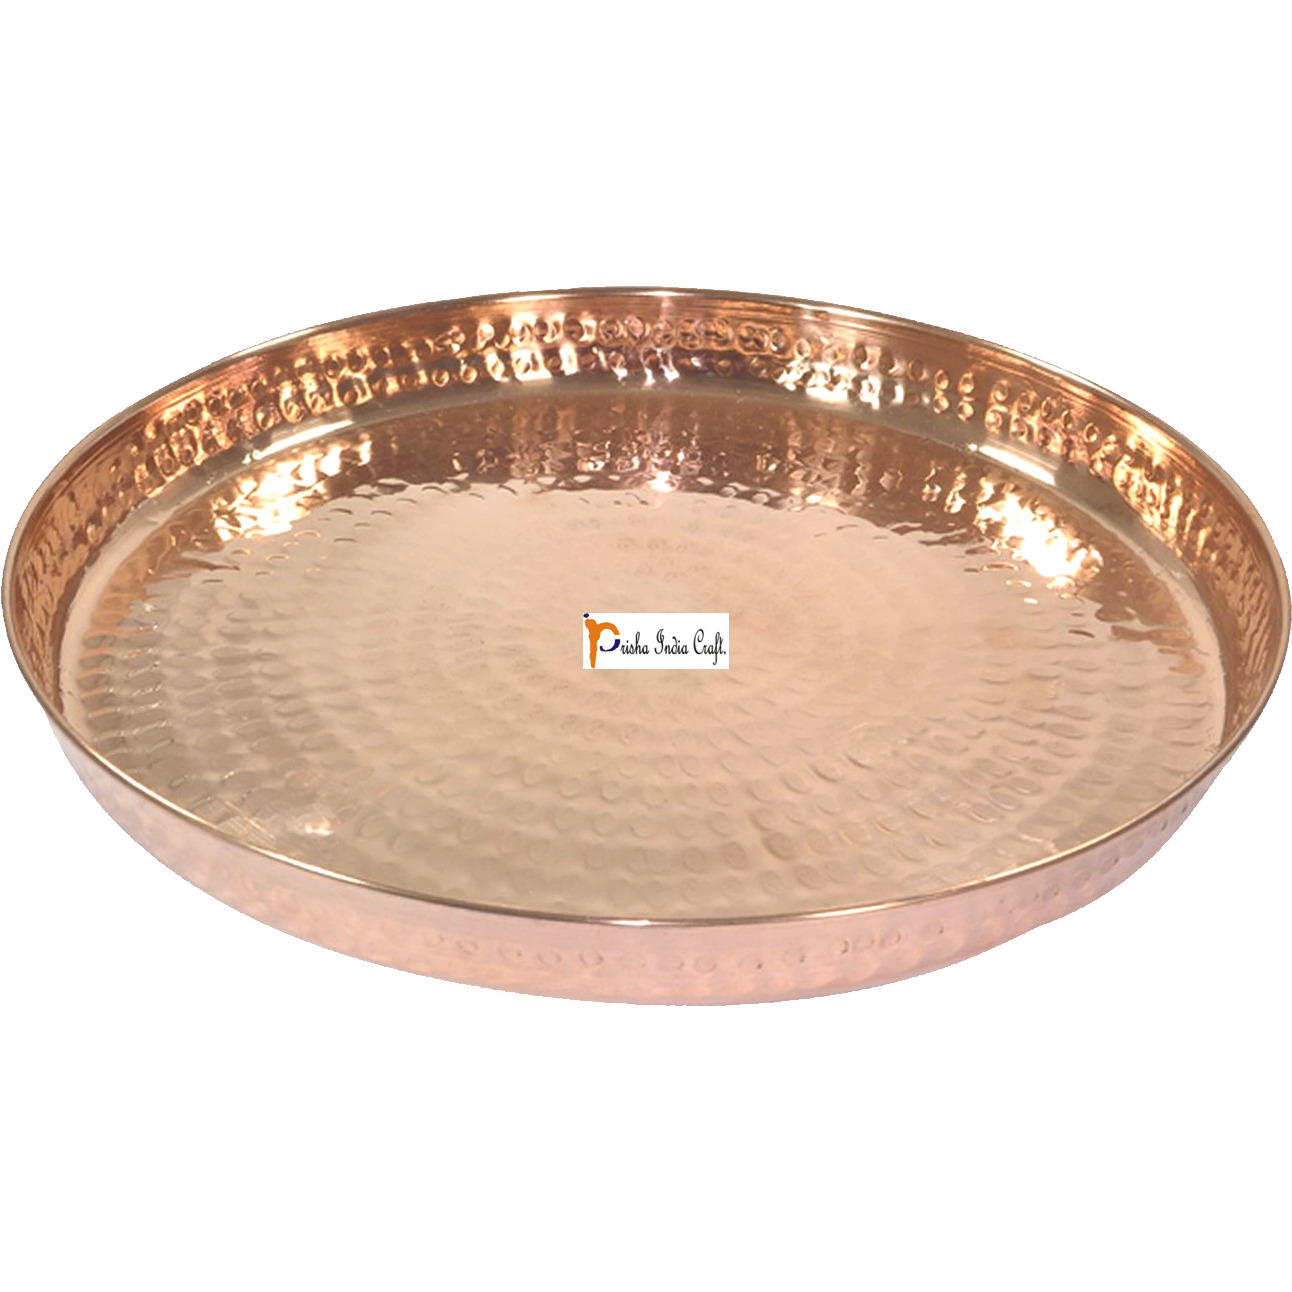 Prisha India Craft B. Dinnerware Pure Copper Thali Set Dia 12  Traditional Dinner Set of Plate, Bowl, Spoons, Glass with Napkin ring and Coaster - Christmas Gift